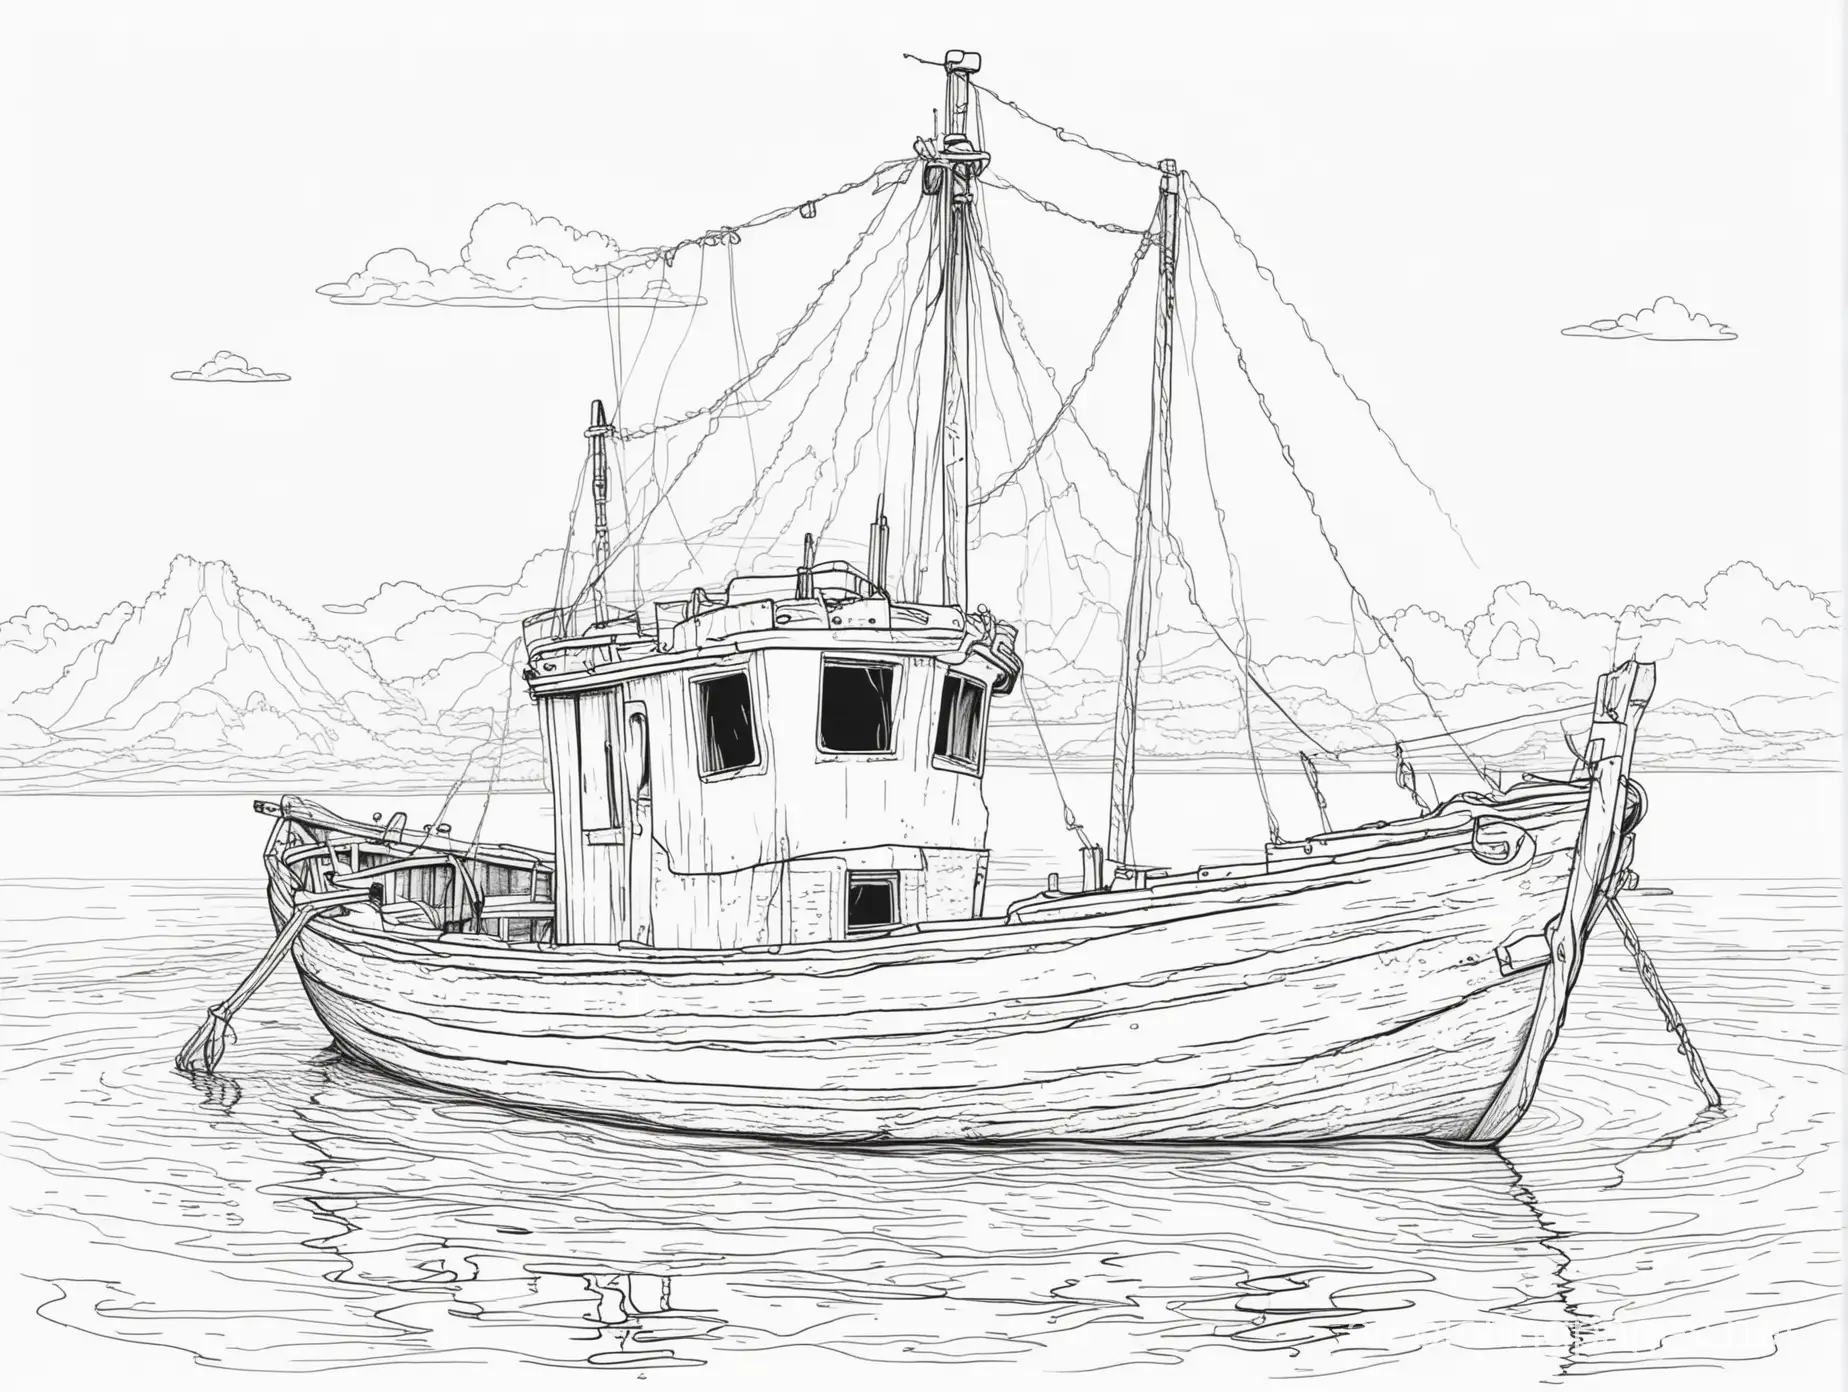 Rickety Boat, Coloring Page, black and white, line art, white background, Simplicity, Ample White Space. The background of the coloring page is plain white to make it easy for young children to color within the lines. The outlines of all the subjects are easy to distinguish, making it simple for kids to color without too much difficulty